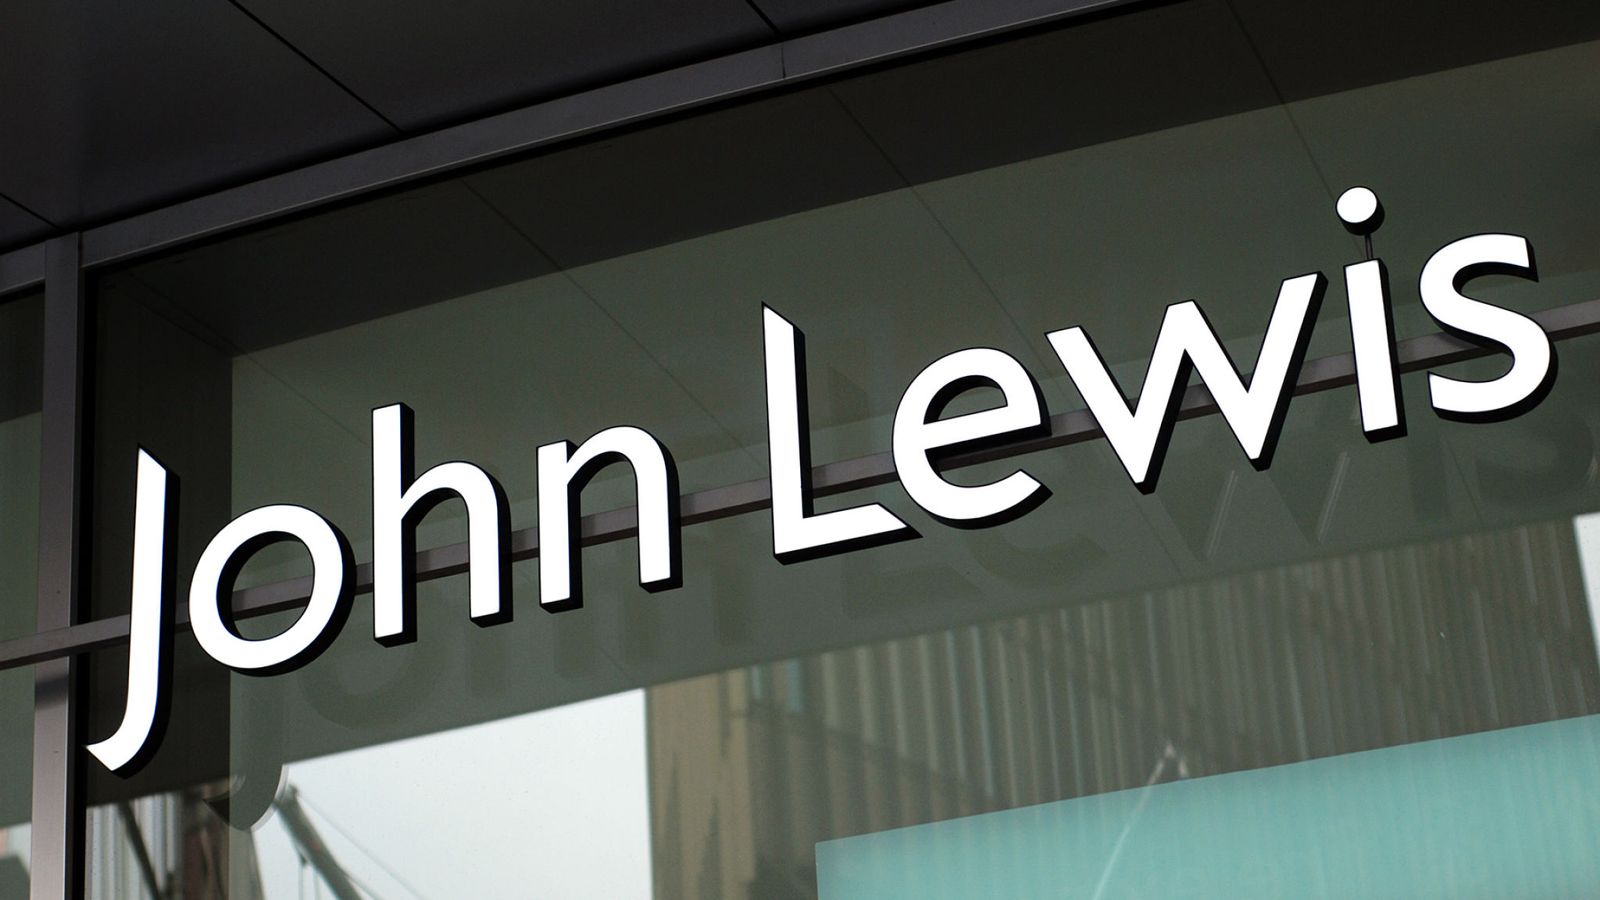 Much Of John Lewis Sales Are Online - HD Wallpaper 